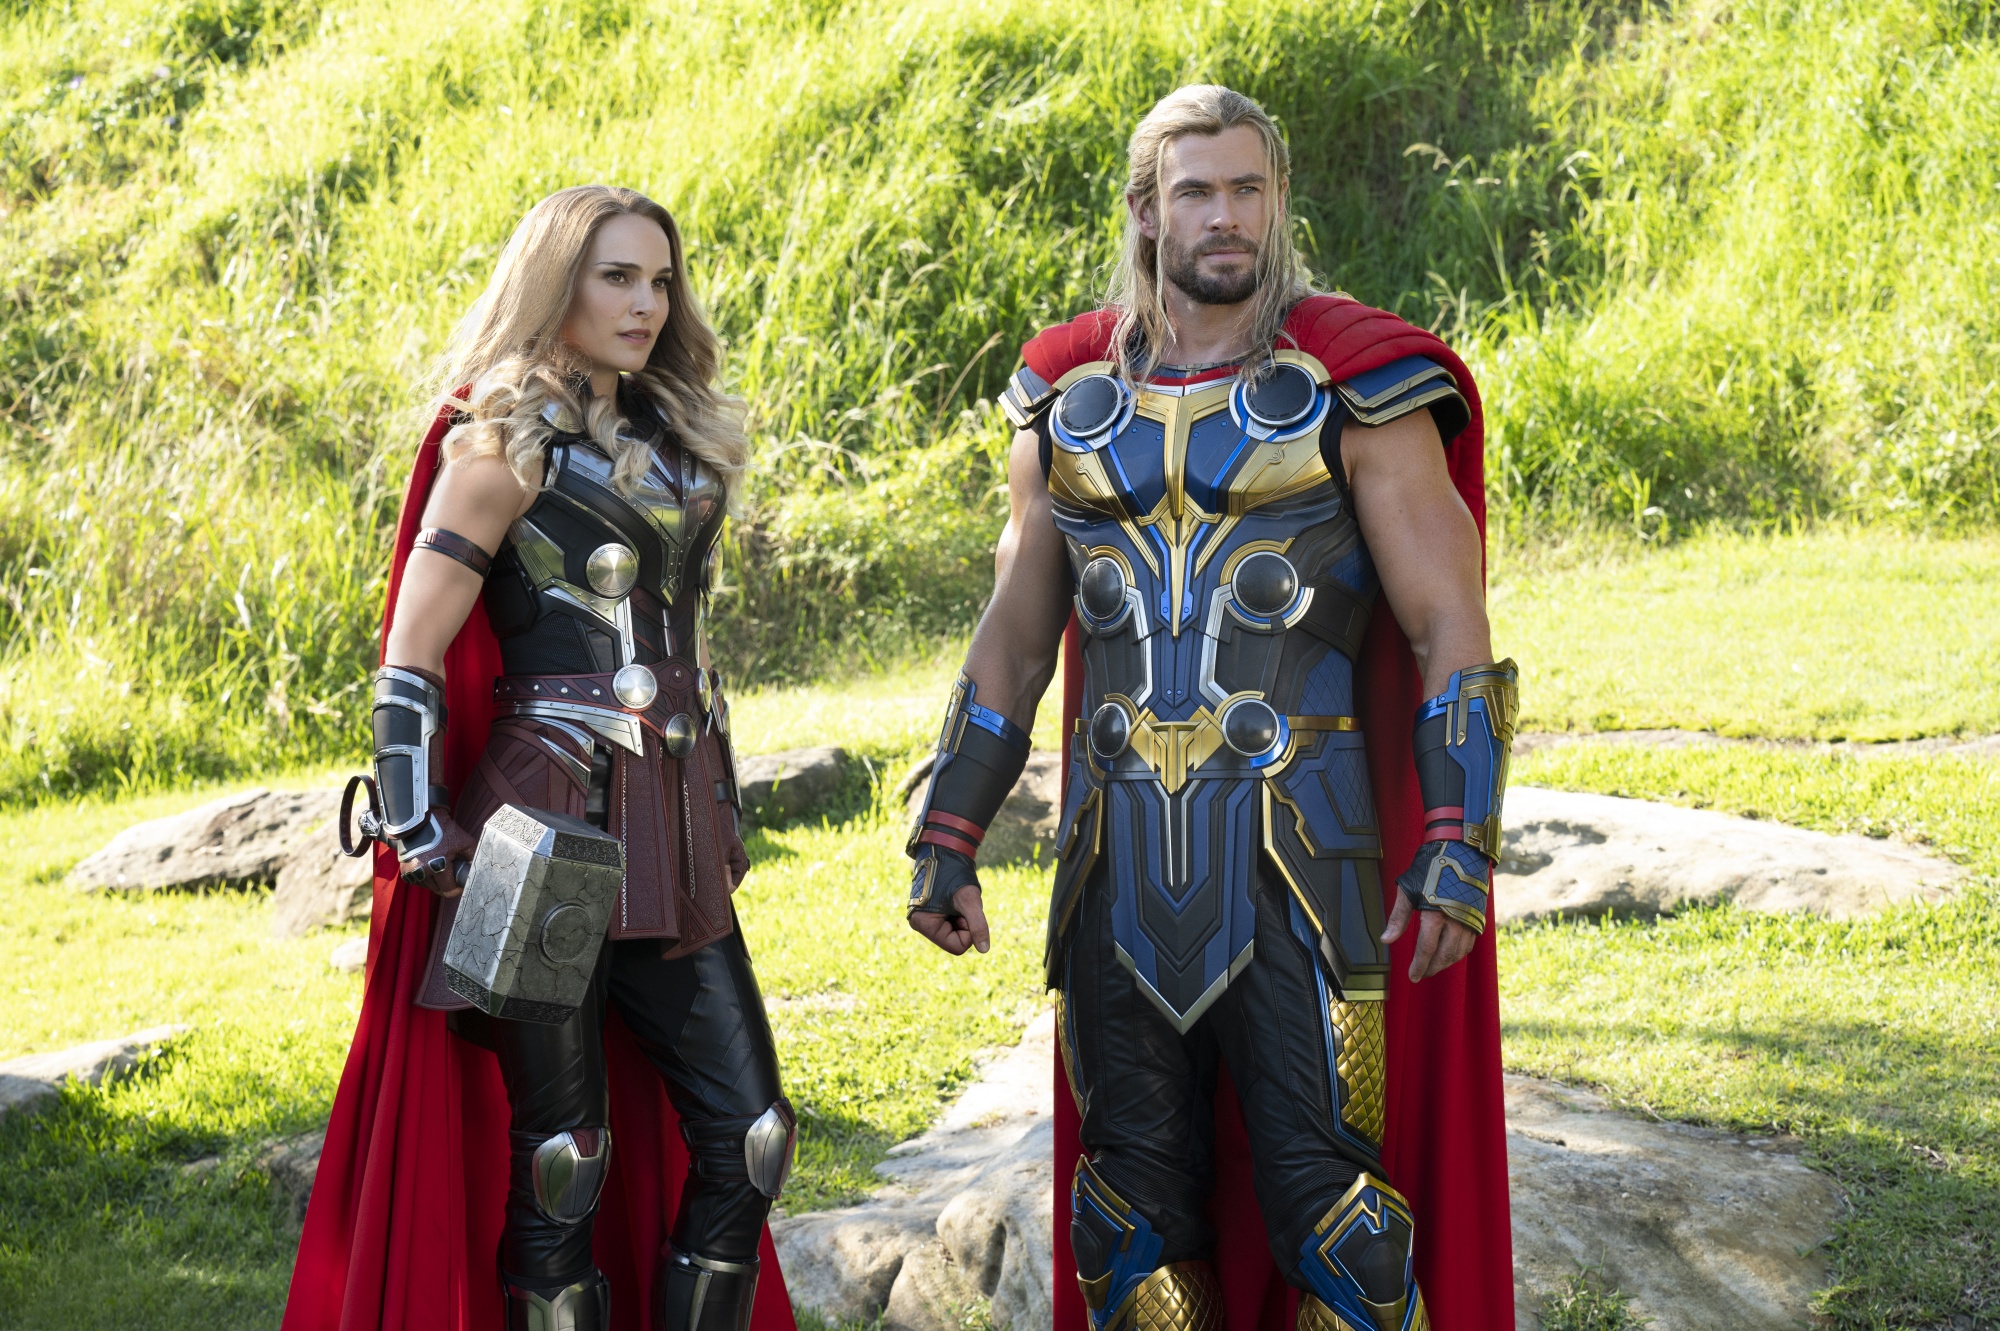 Marvel's Rotten Tomatoes Record Makes Thor: Love & Thunder Look Bad